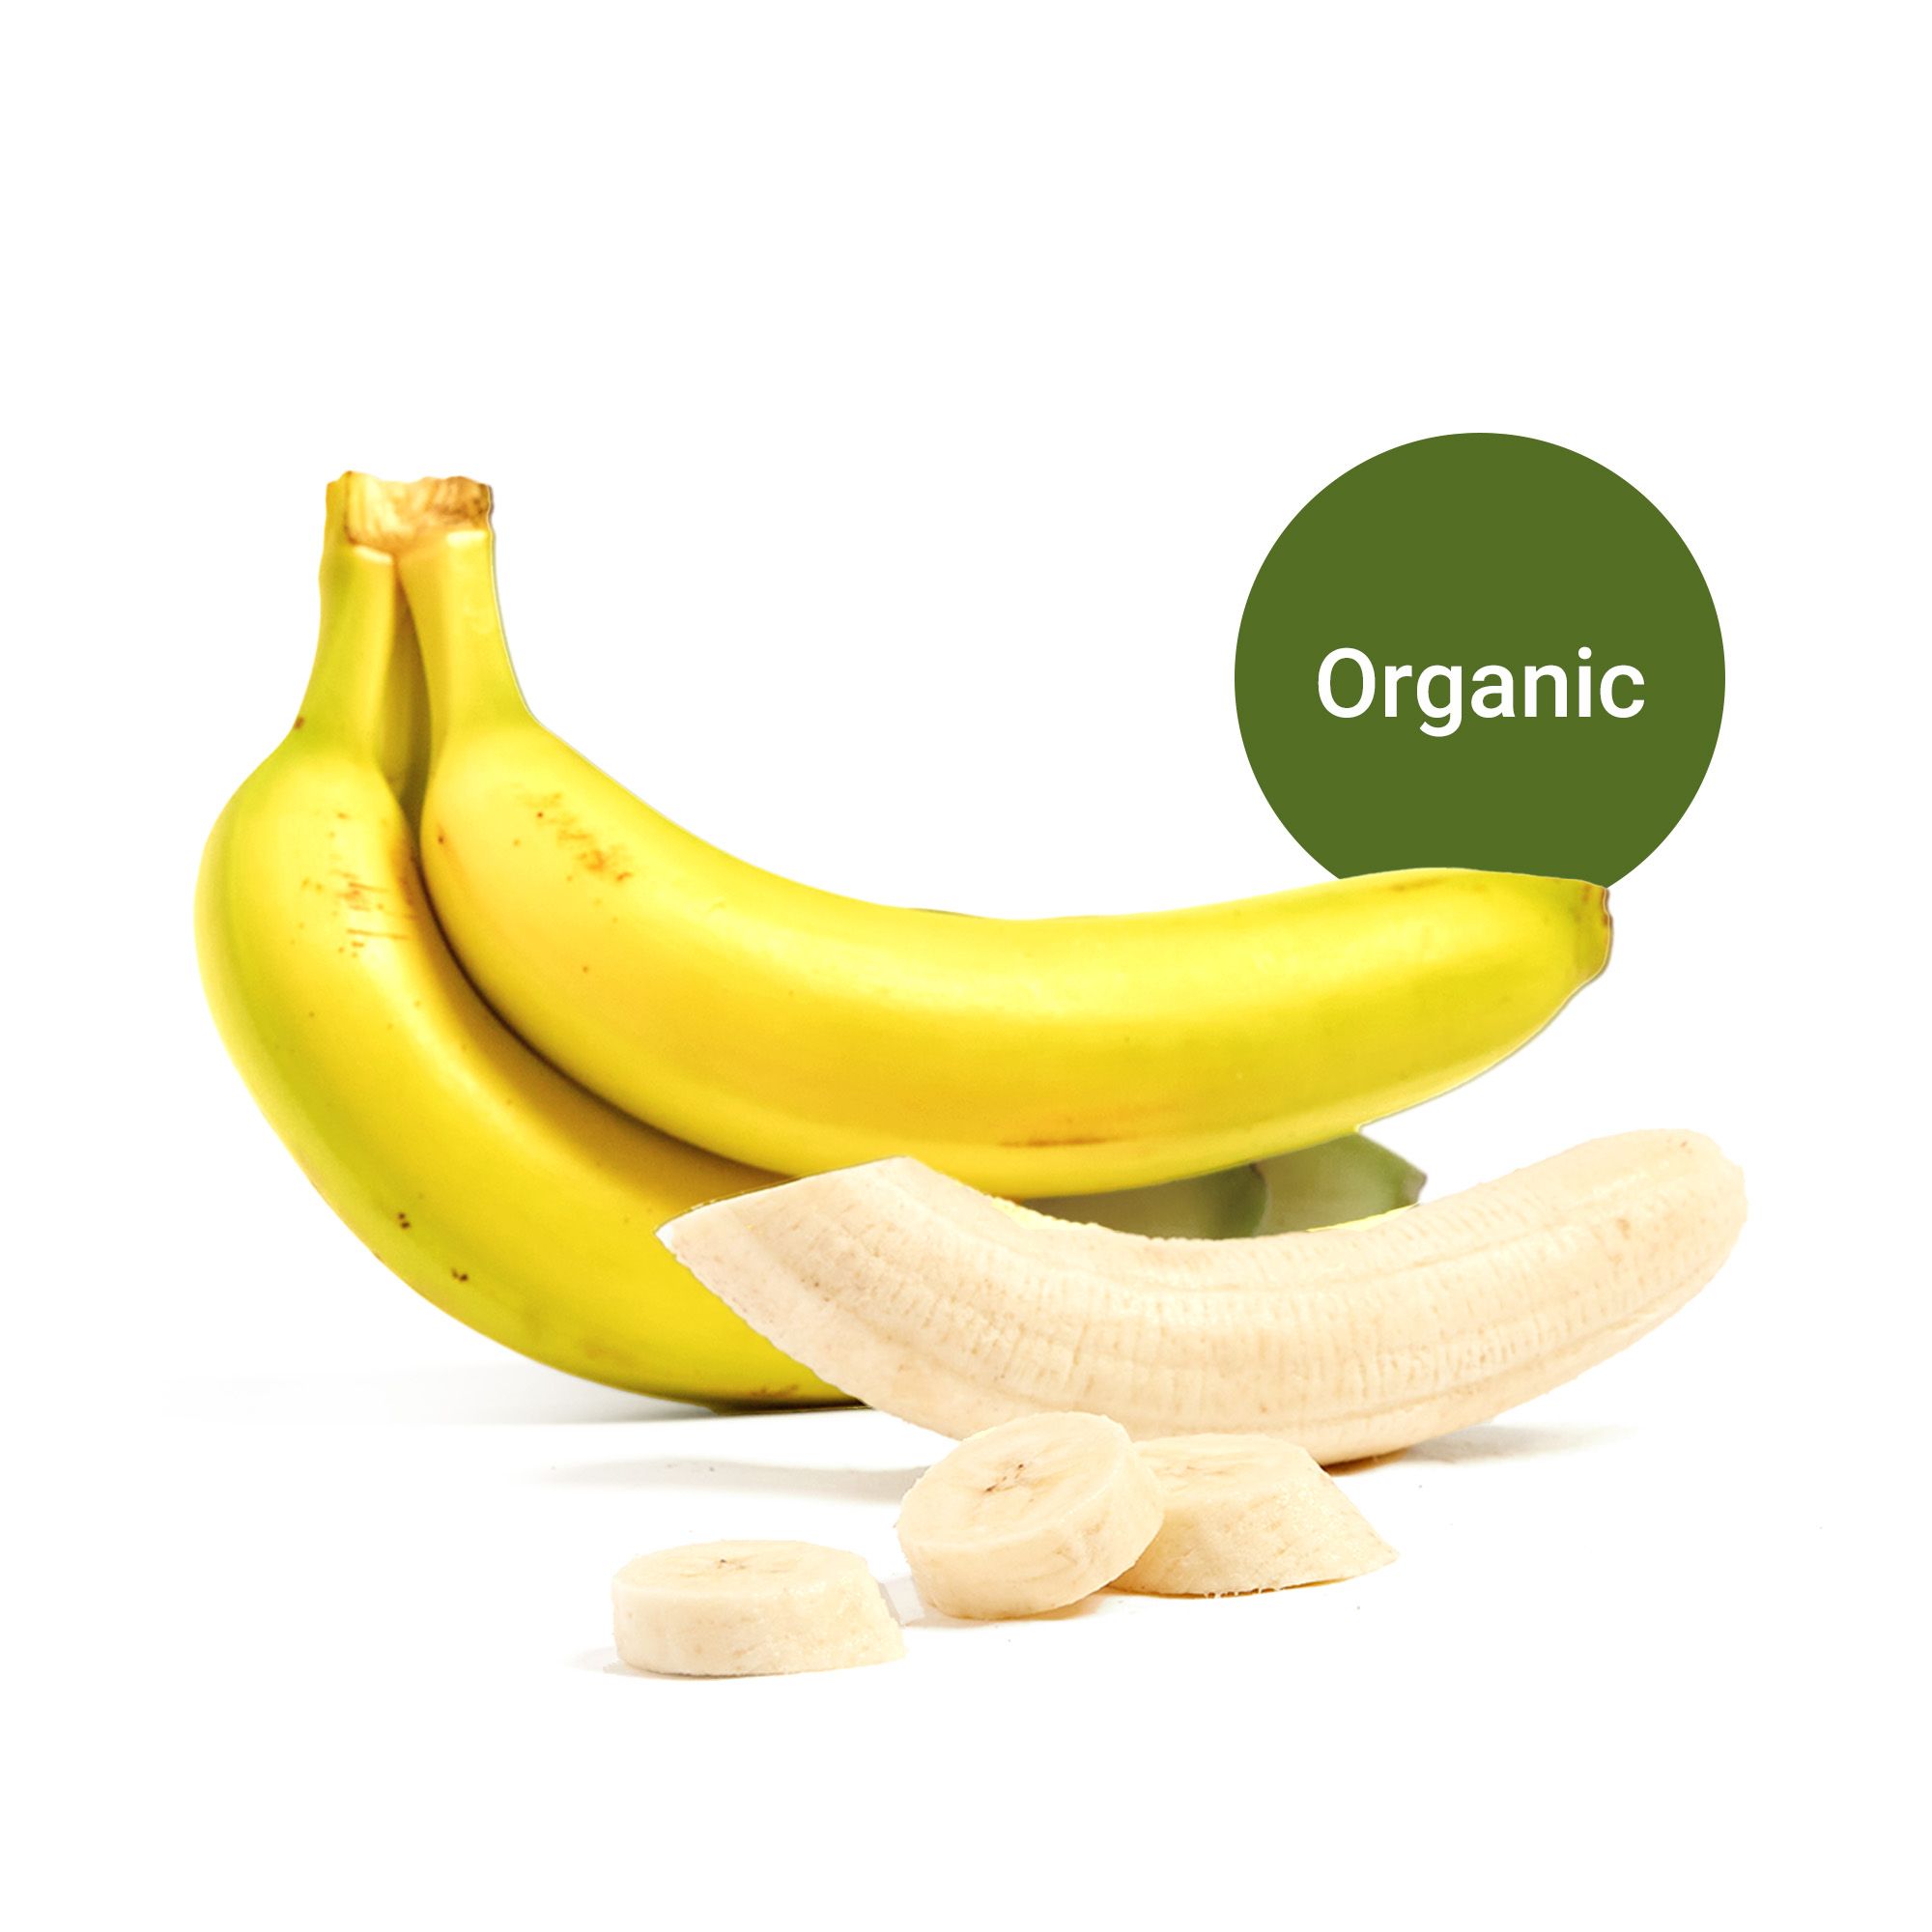 Organic Banana Bunch, 2lbs avg.wt delivery in Denver, CO